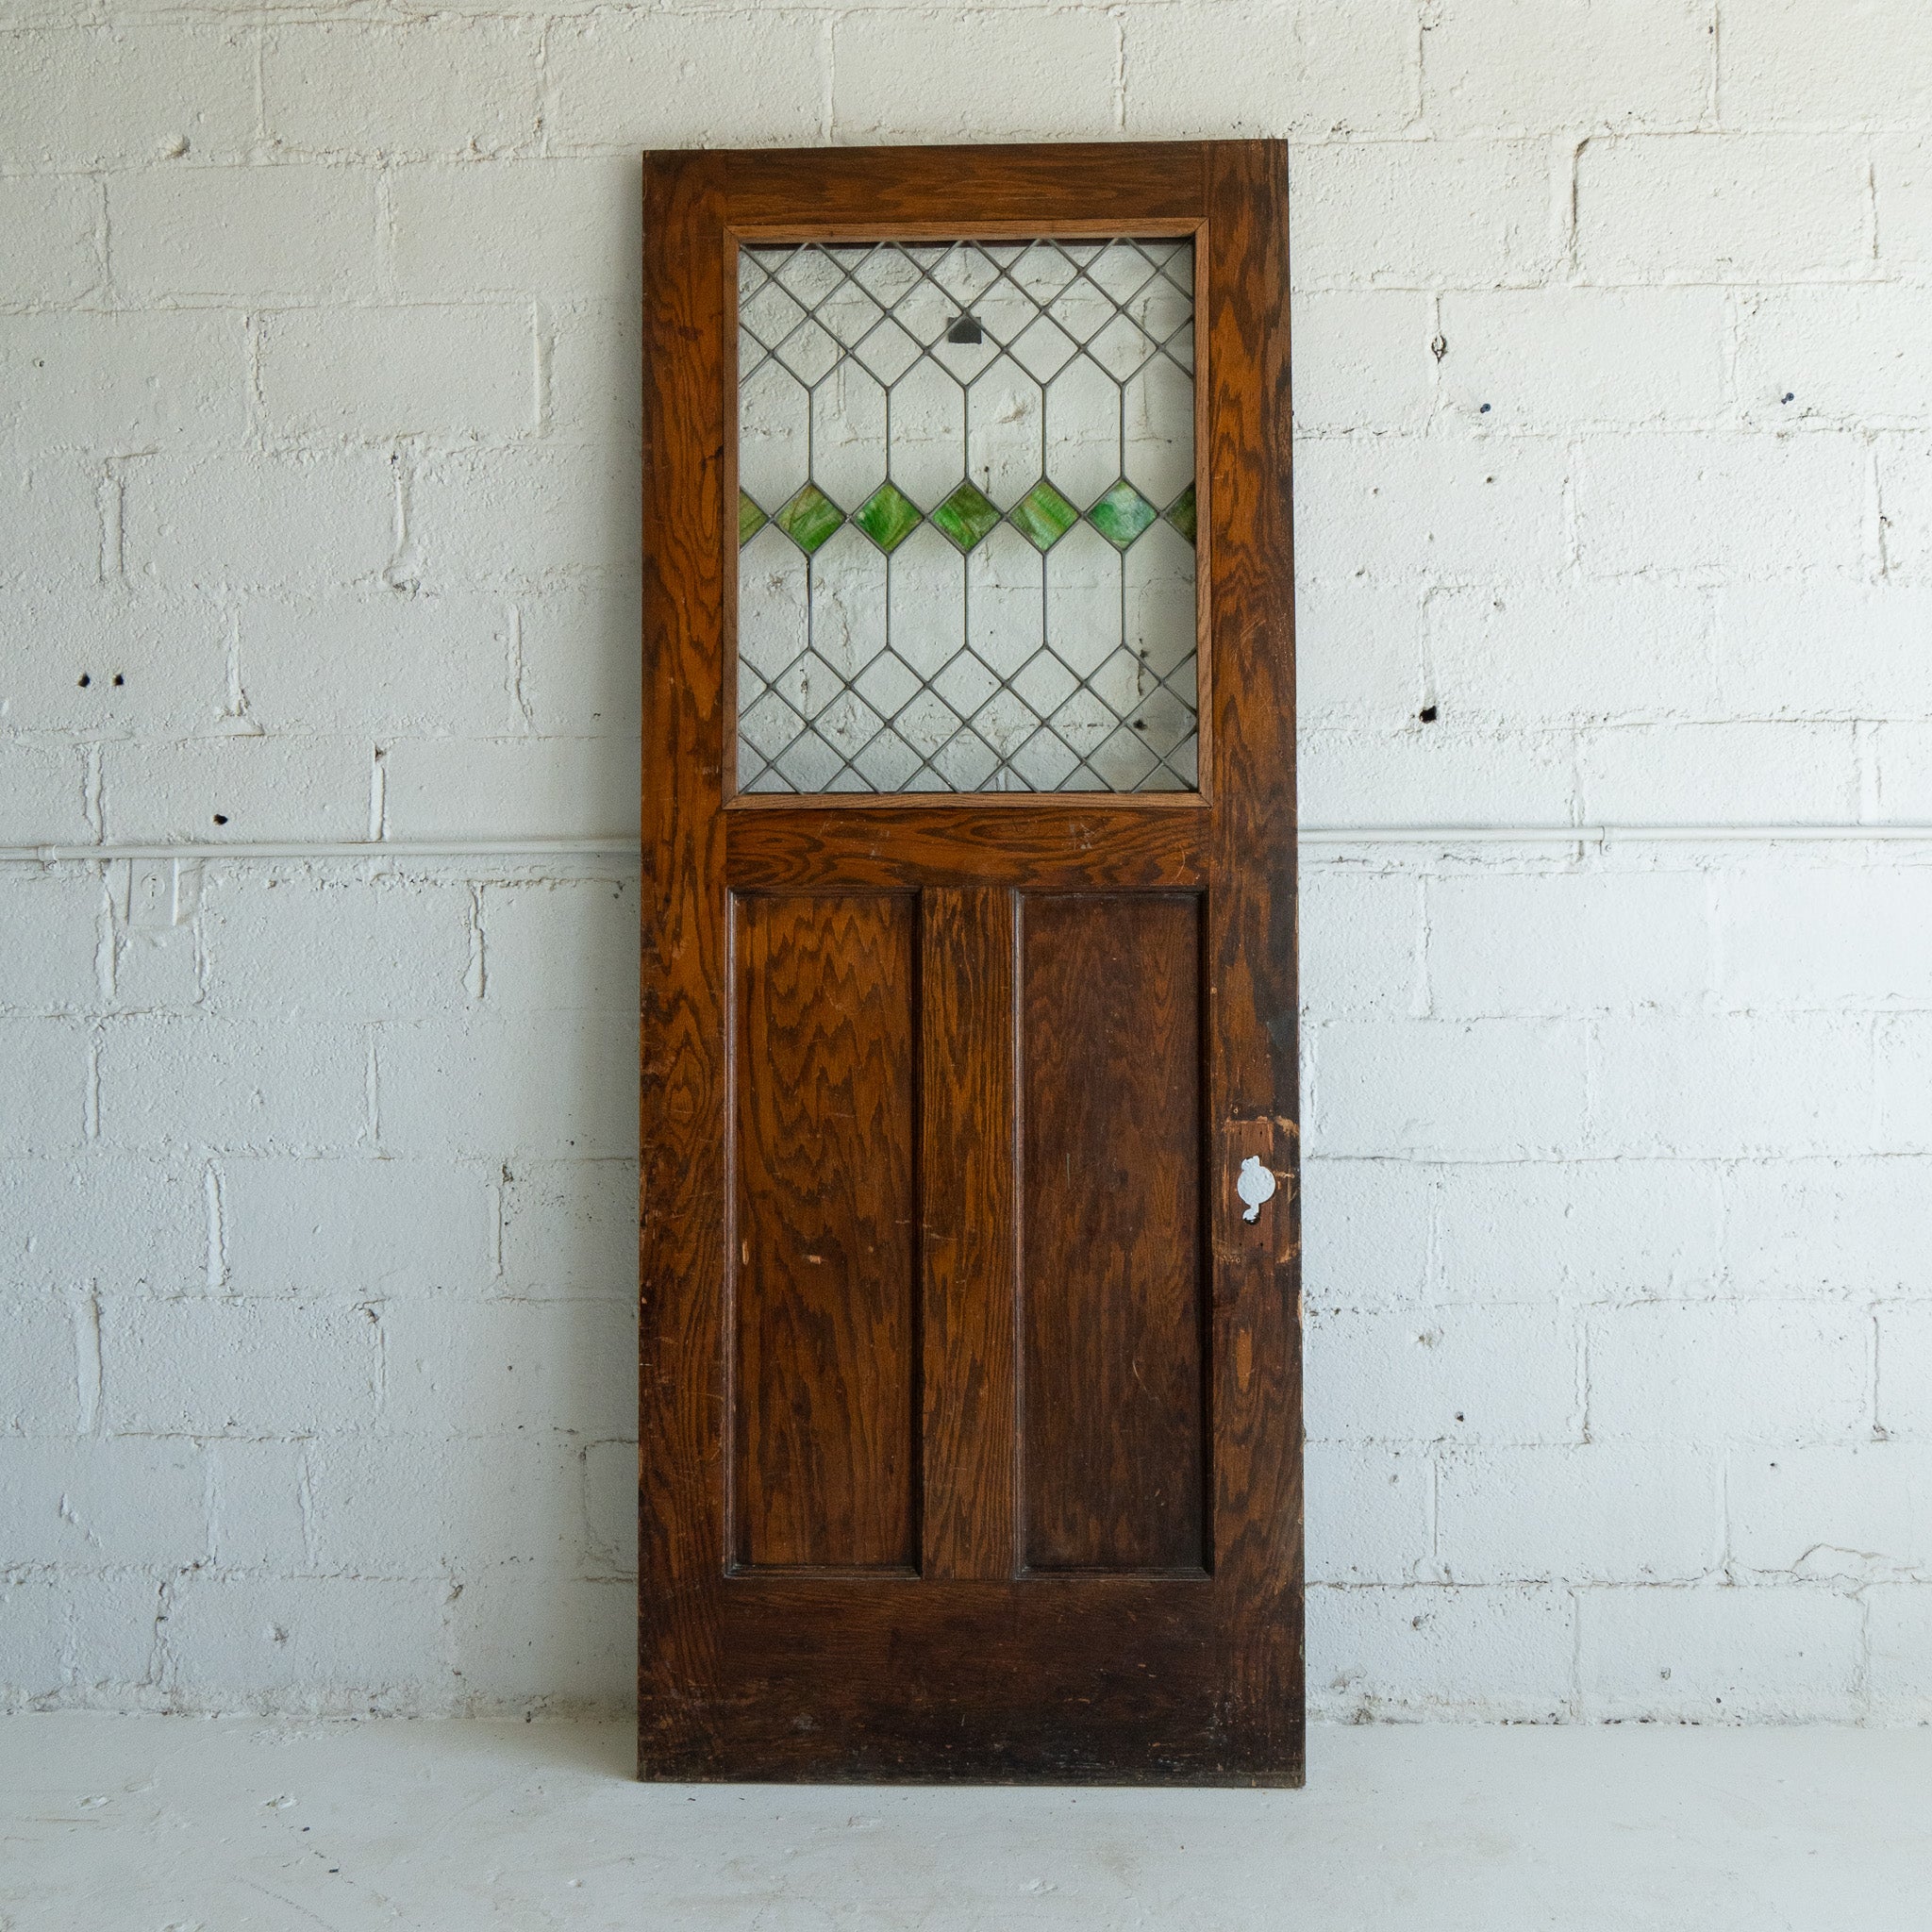 Salvaged Oak door with Stained Glass